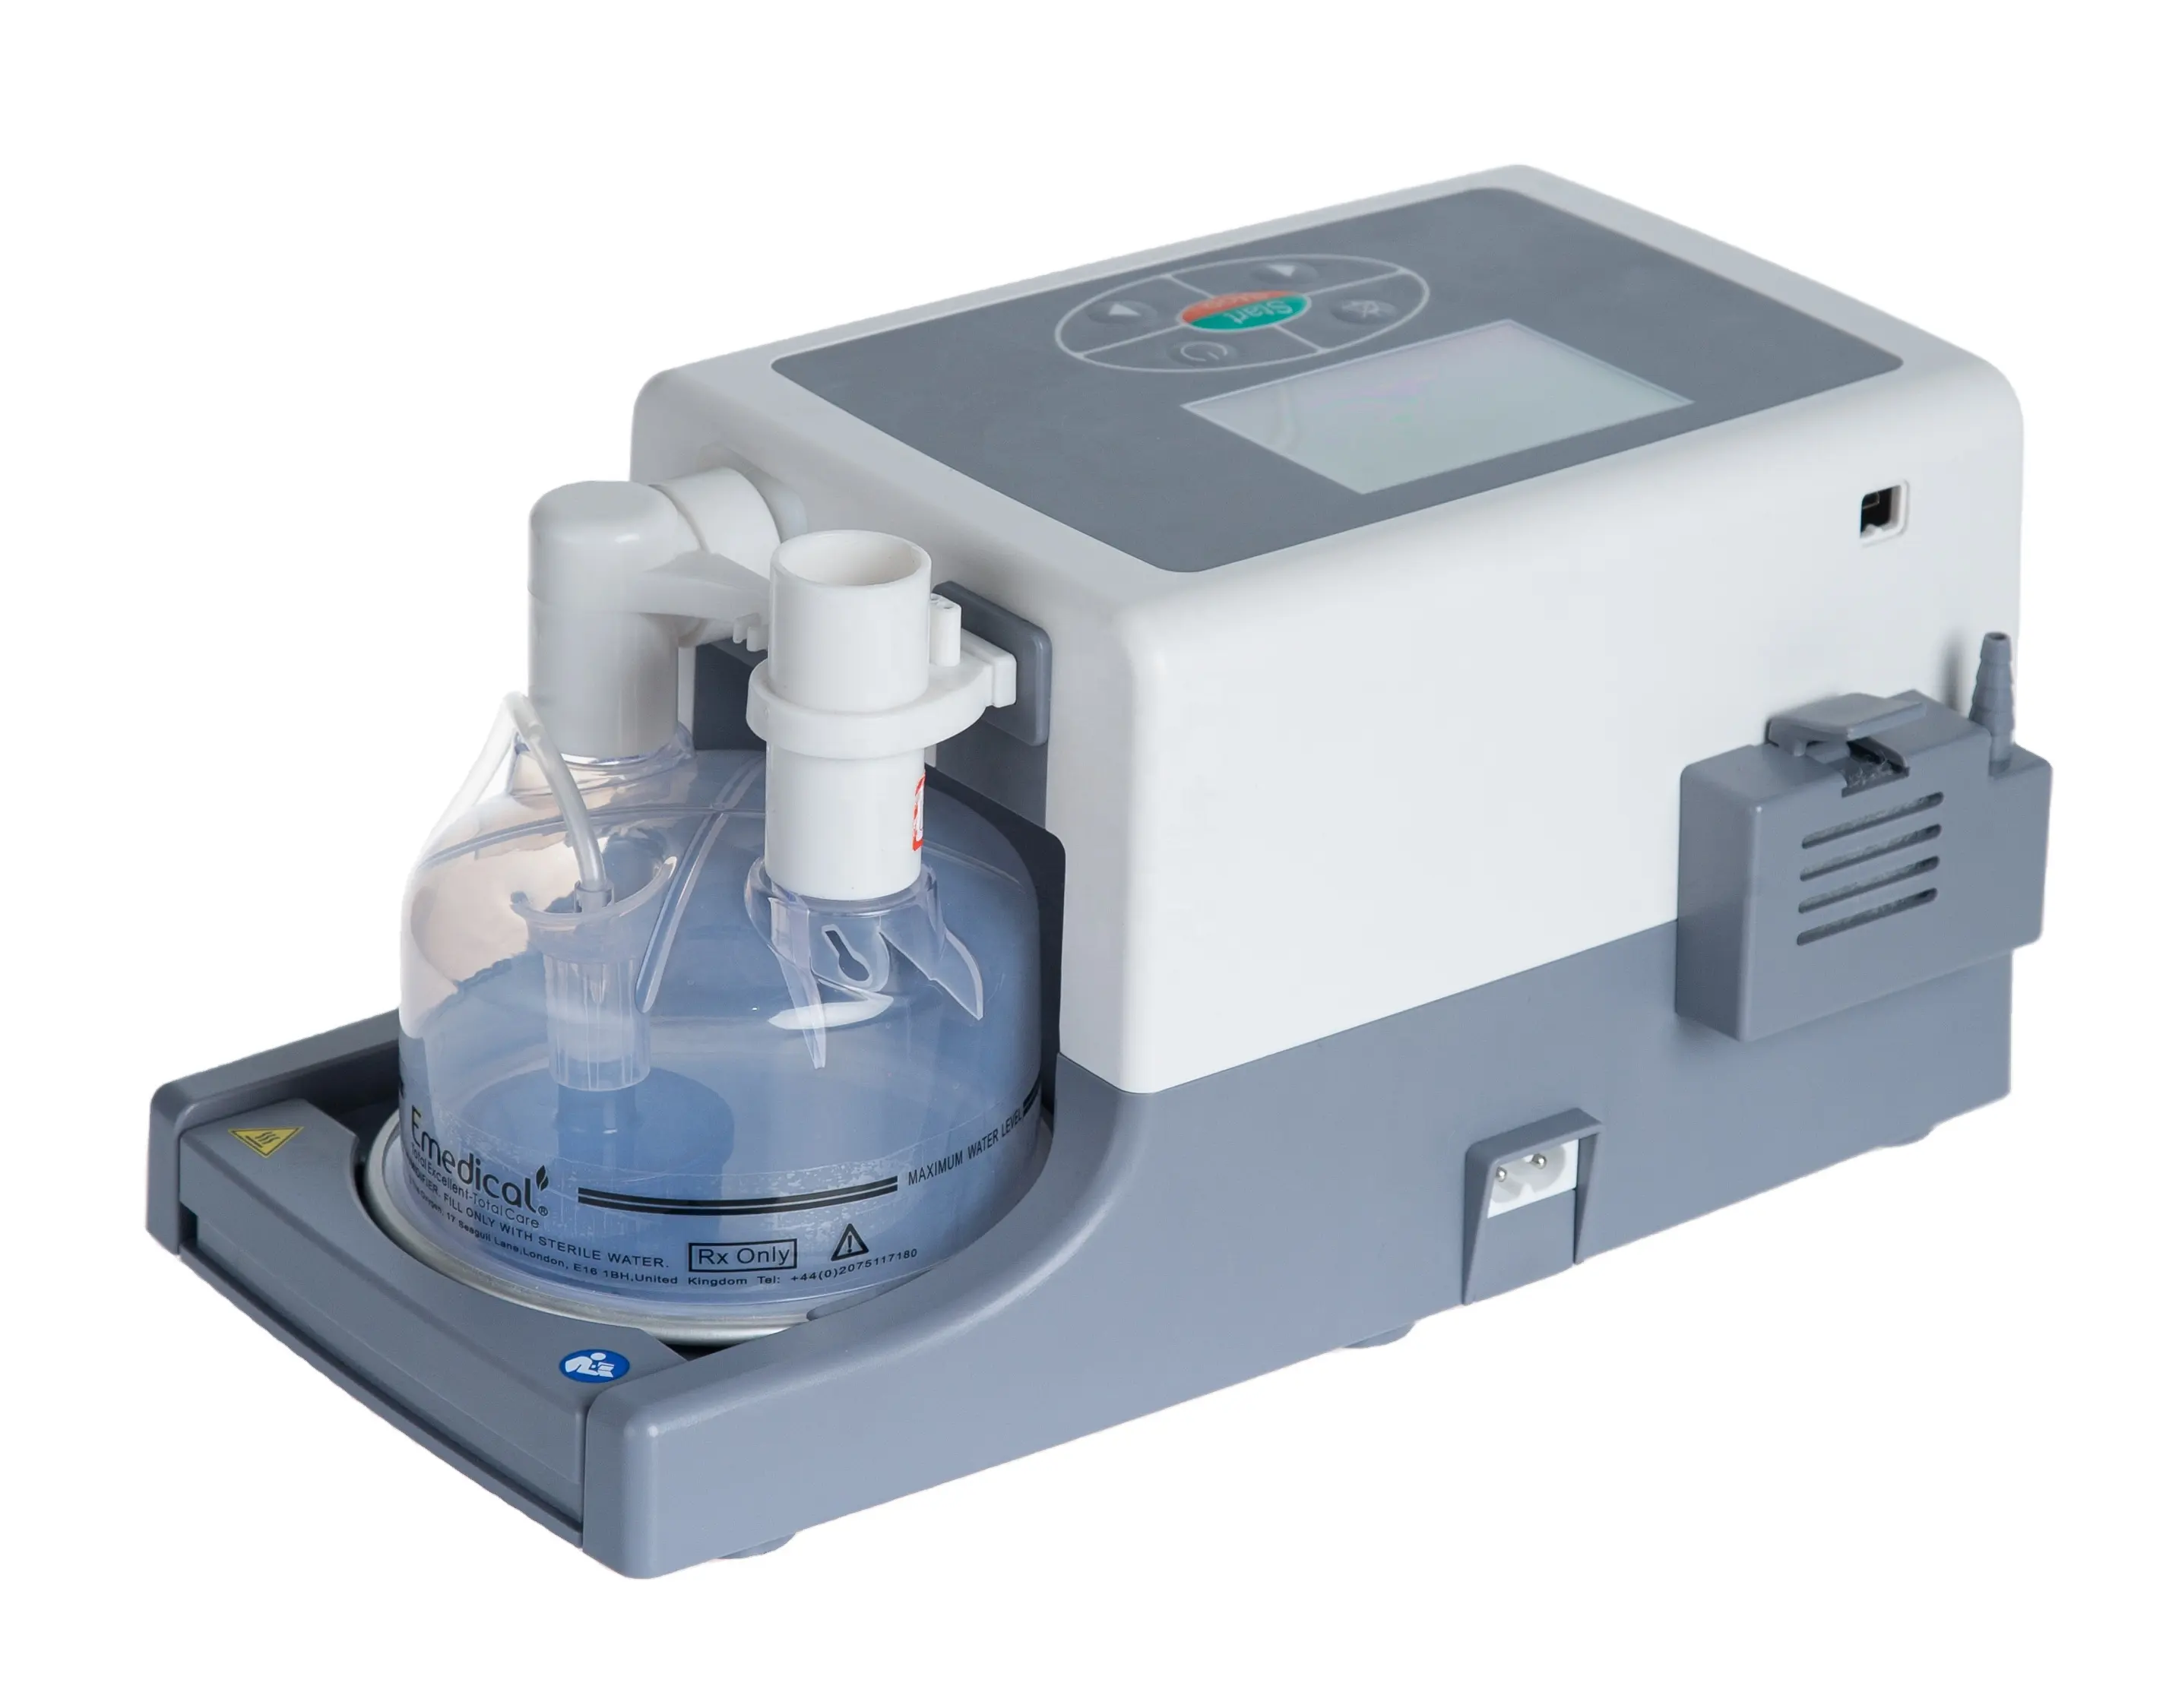 Medical hospital ICU Oxygen Concentrator HFNC High Flow Nasal Cannula Oxygen Therapy machine